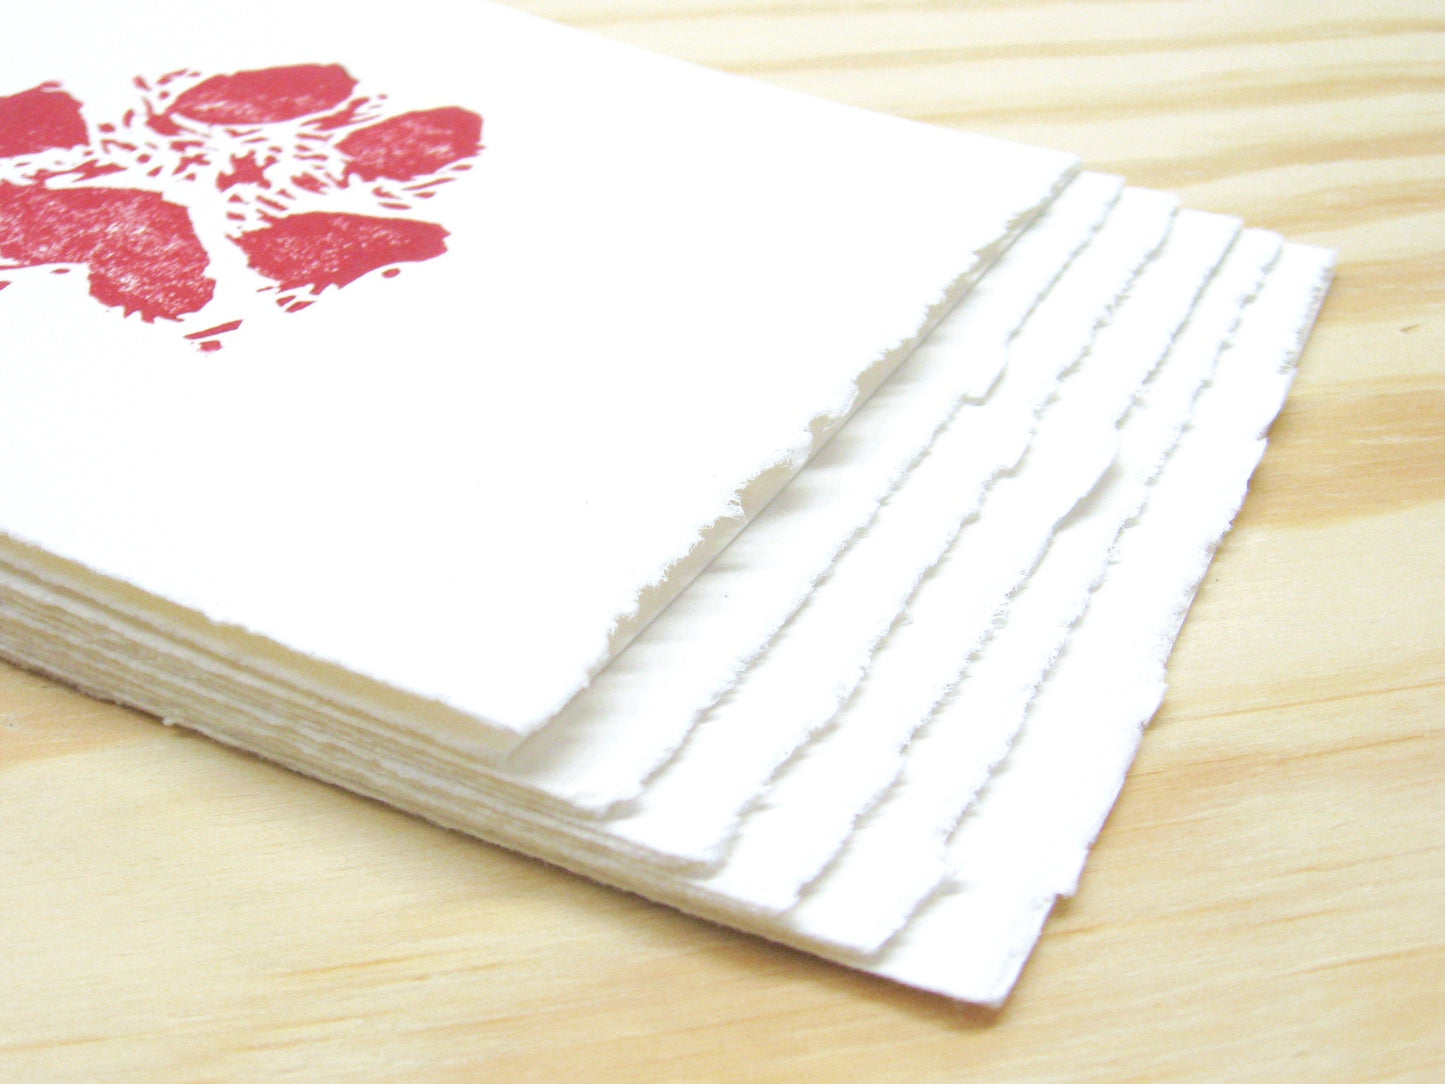 Dog Paw Bright Red 6-pack cards - woodblock printed